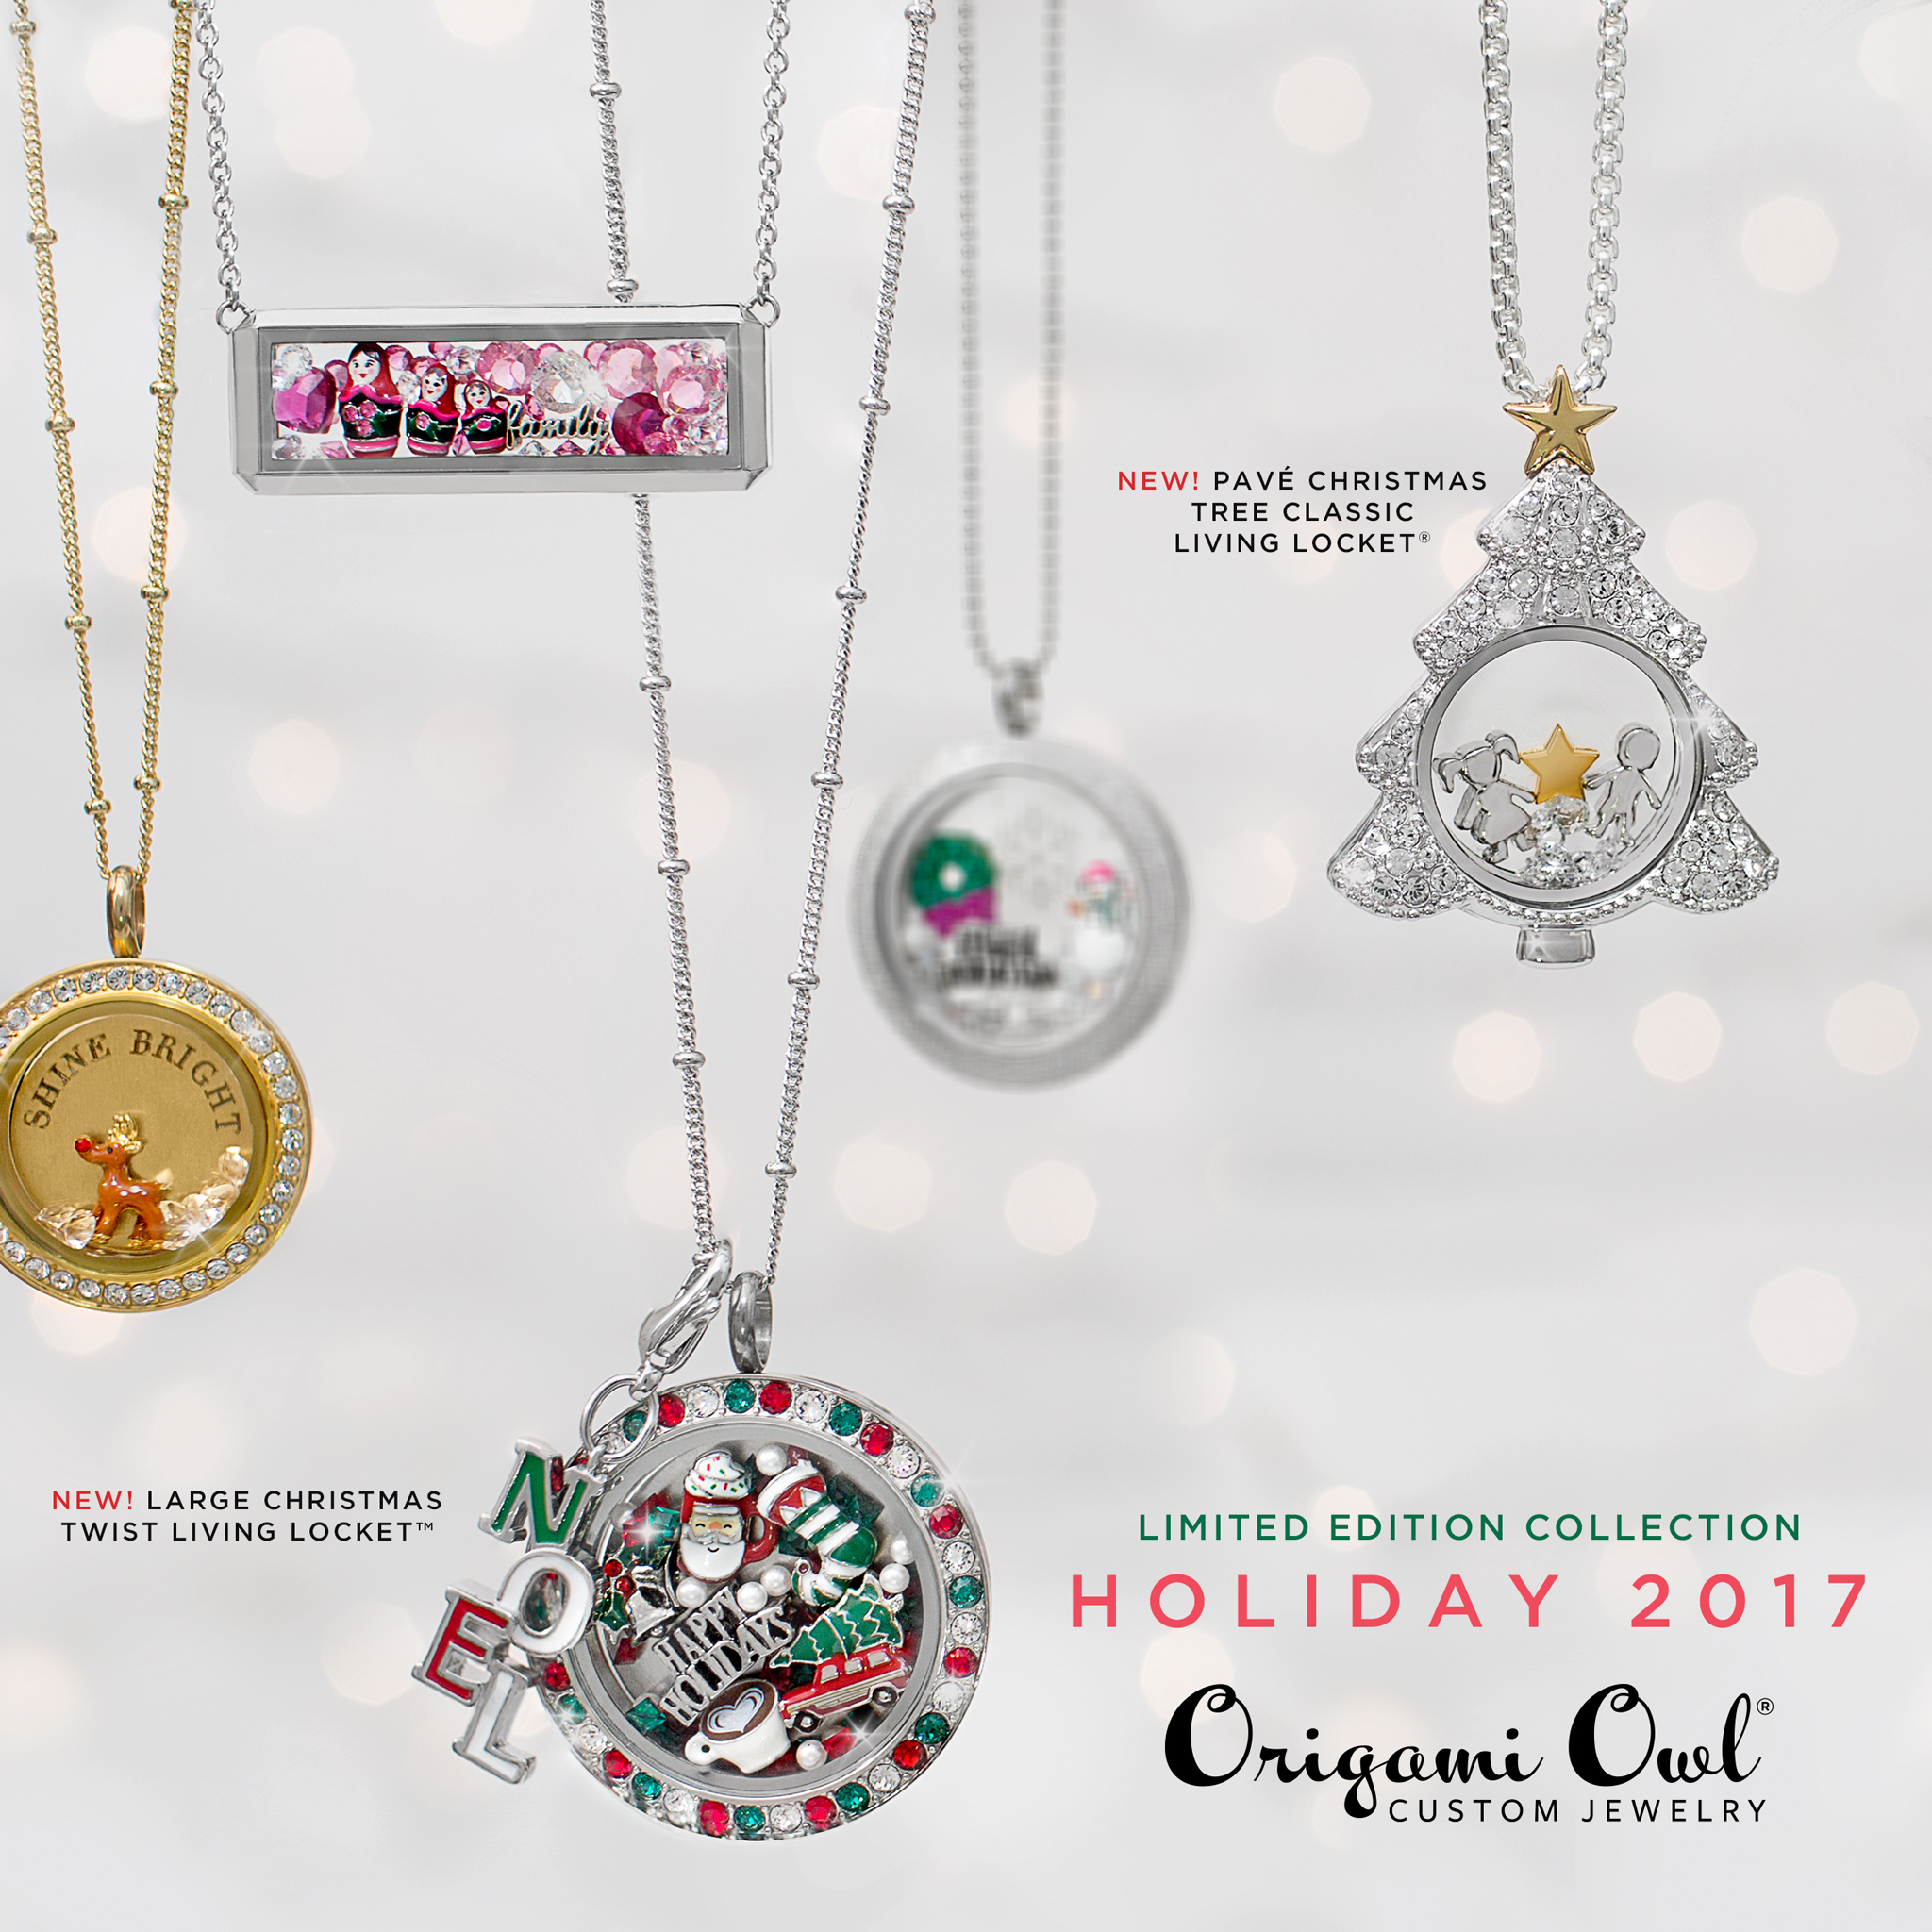 Origami Owl Christmas Charms Origami Owl Holiday 2017 Collection Reveals Locket Loaded With